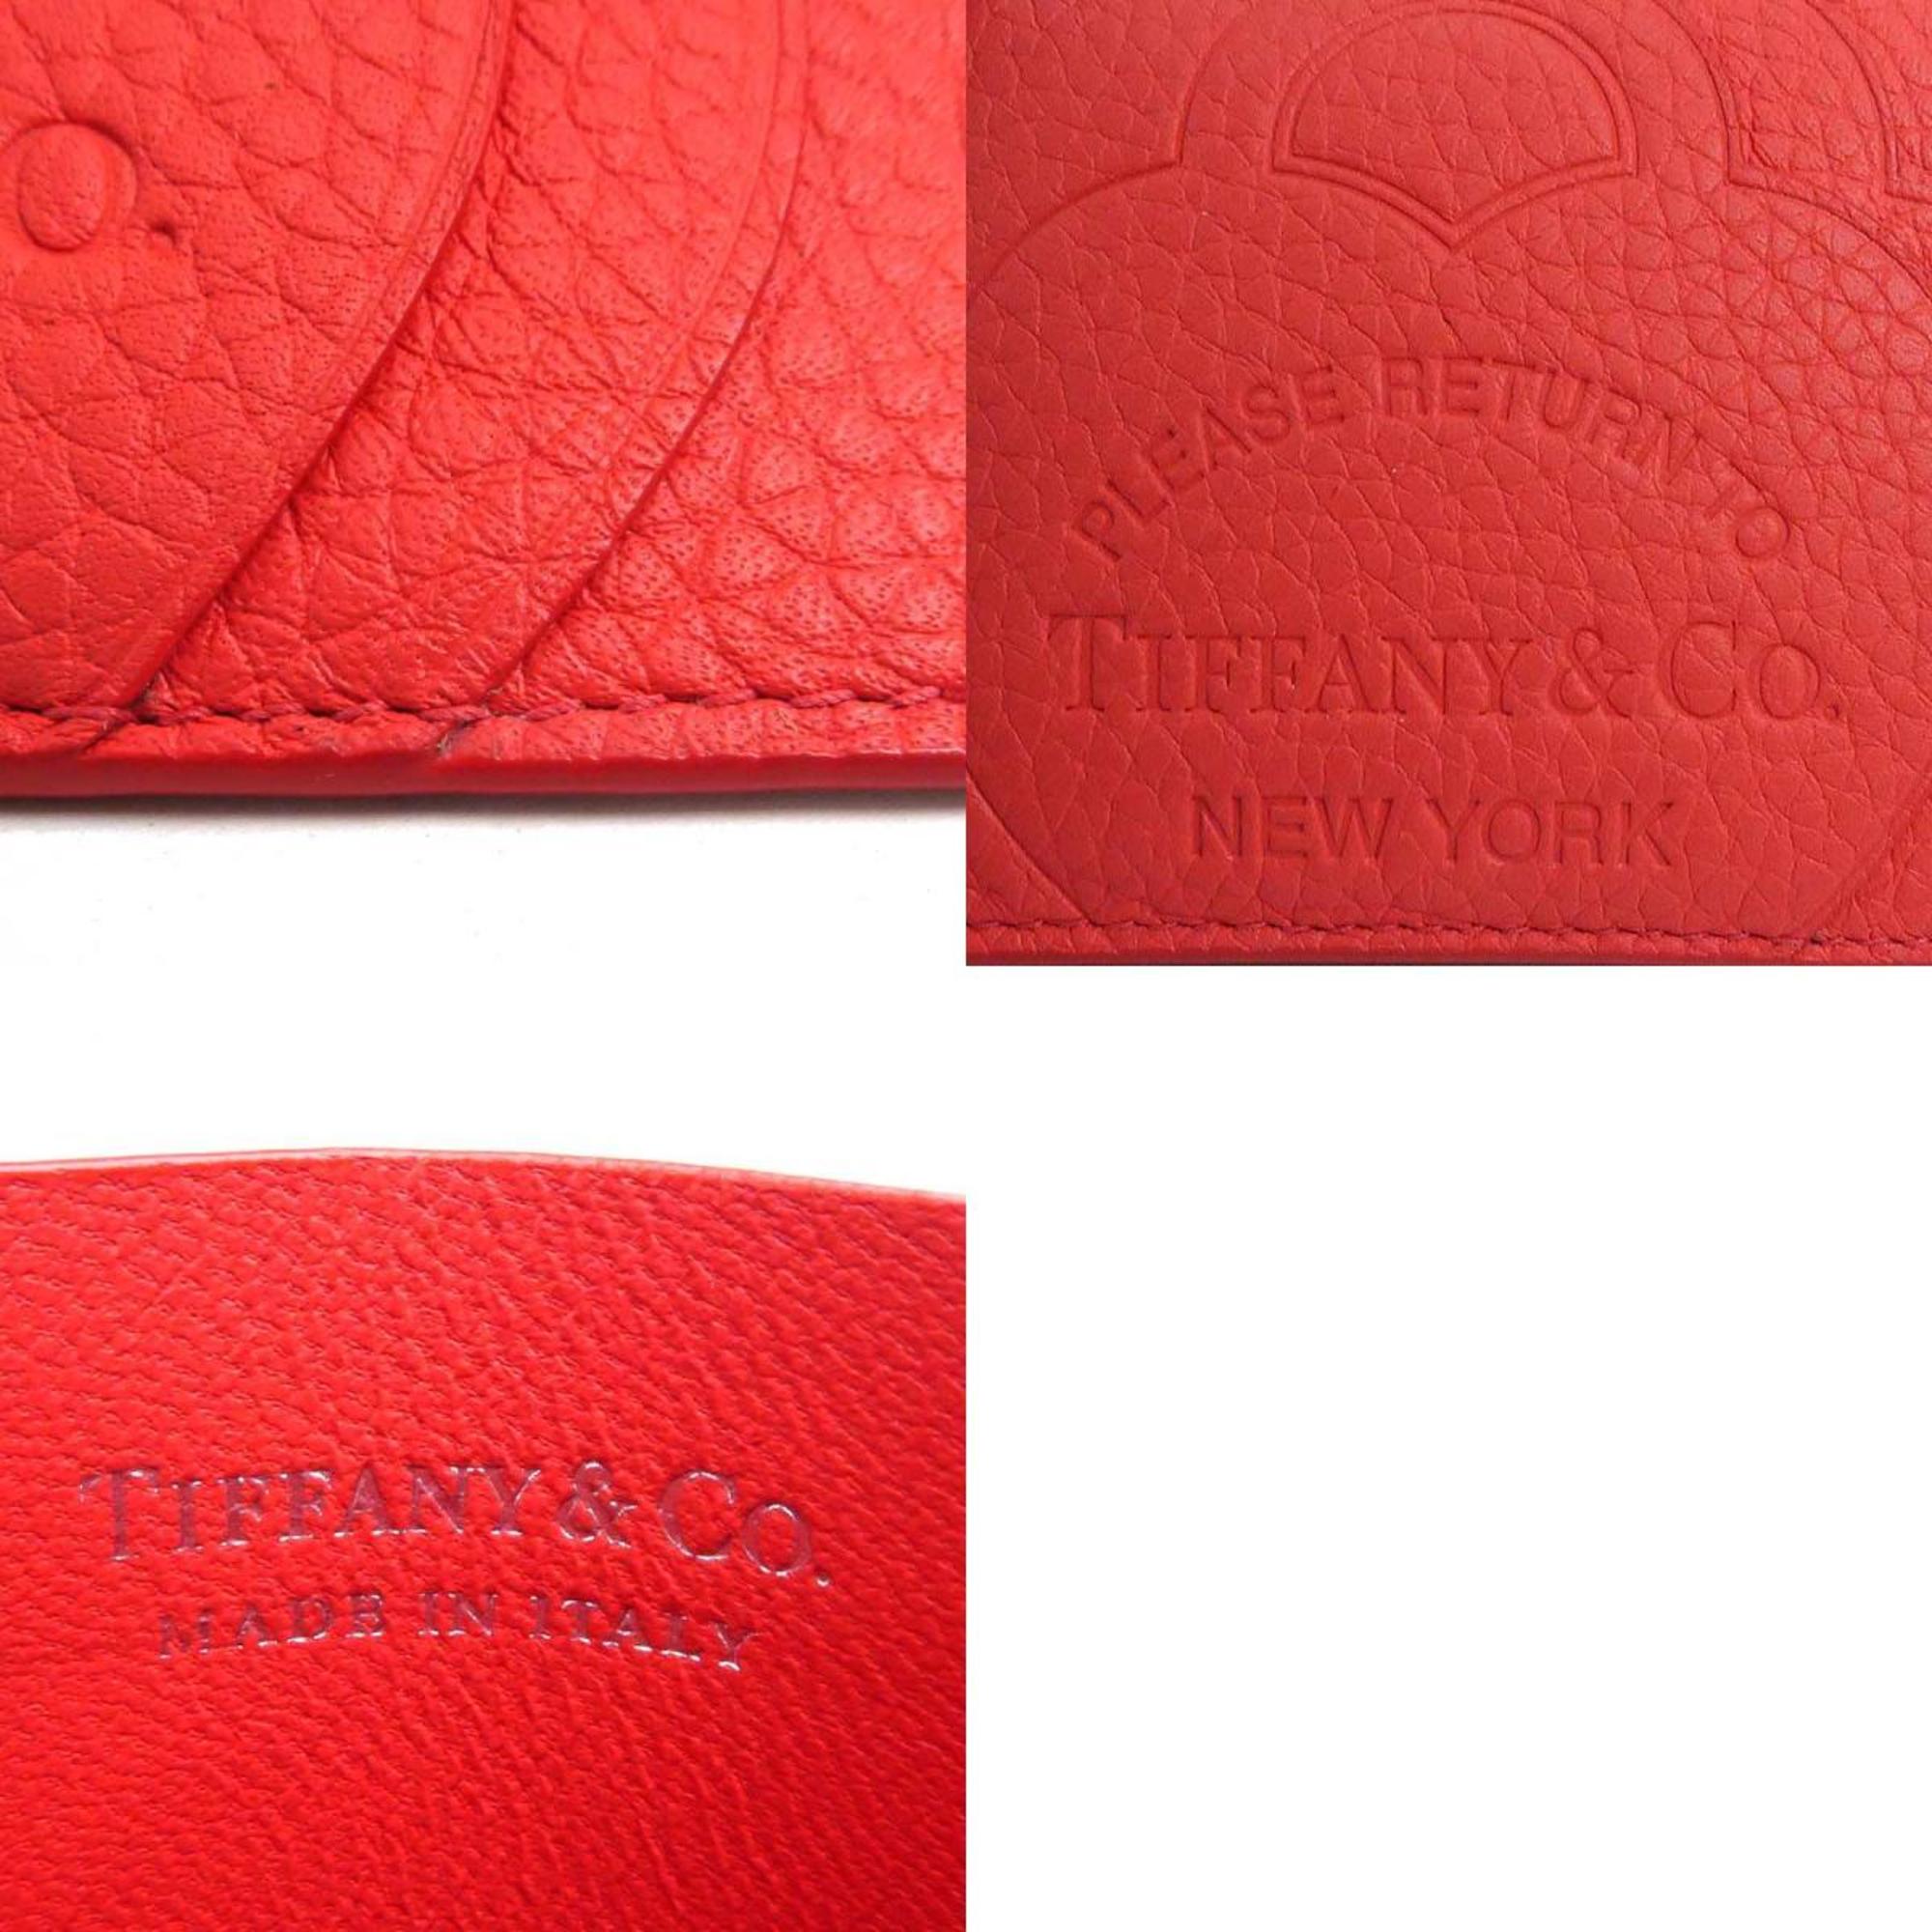 Tiffany TIFFANY&Co. Card Case Business Holder Pass Return to Leather Red Ladies